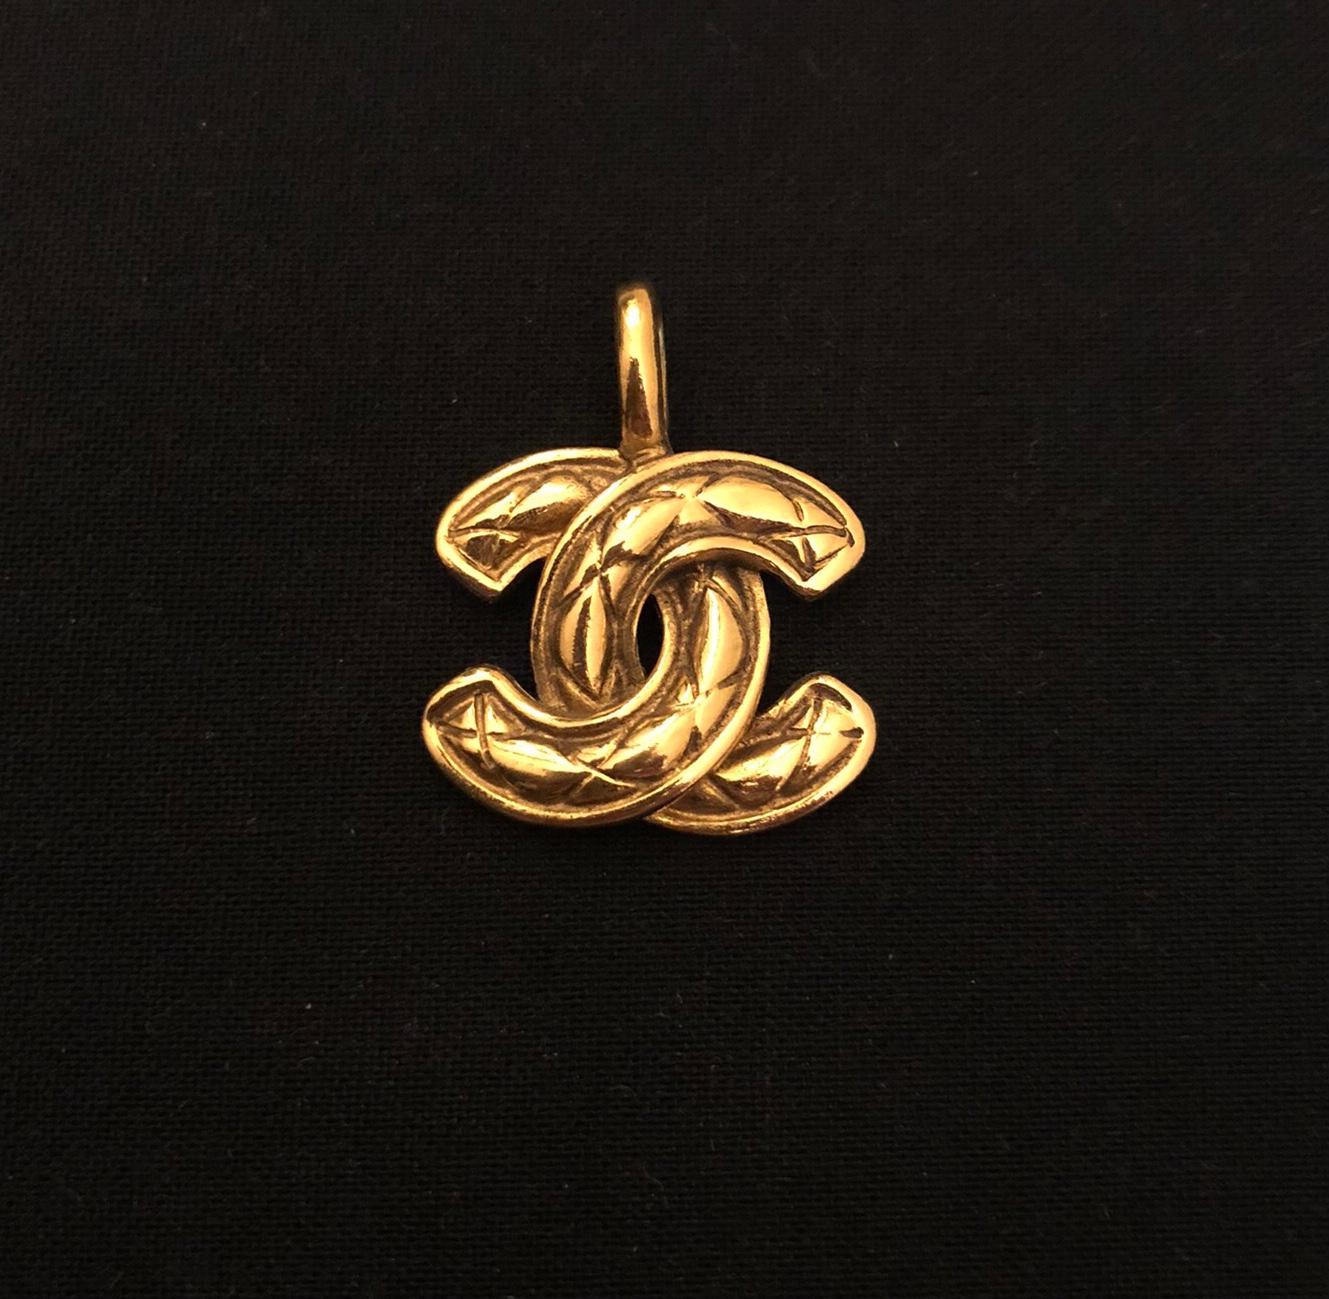 1980s vintage Chanel gold toned quilted CC pendant charm once belonged to a short chain necklace. You can secure it on your favorite gold toned chain or pearl necklace as in the picture. Measures approximately 3 x 2.5 cm. The cultured pearl necklace